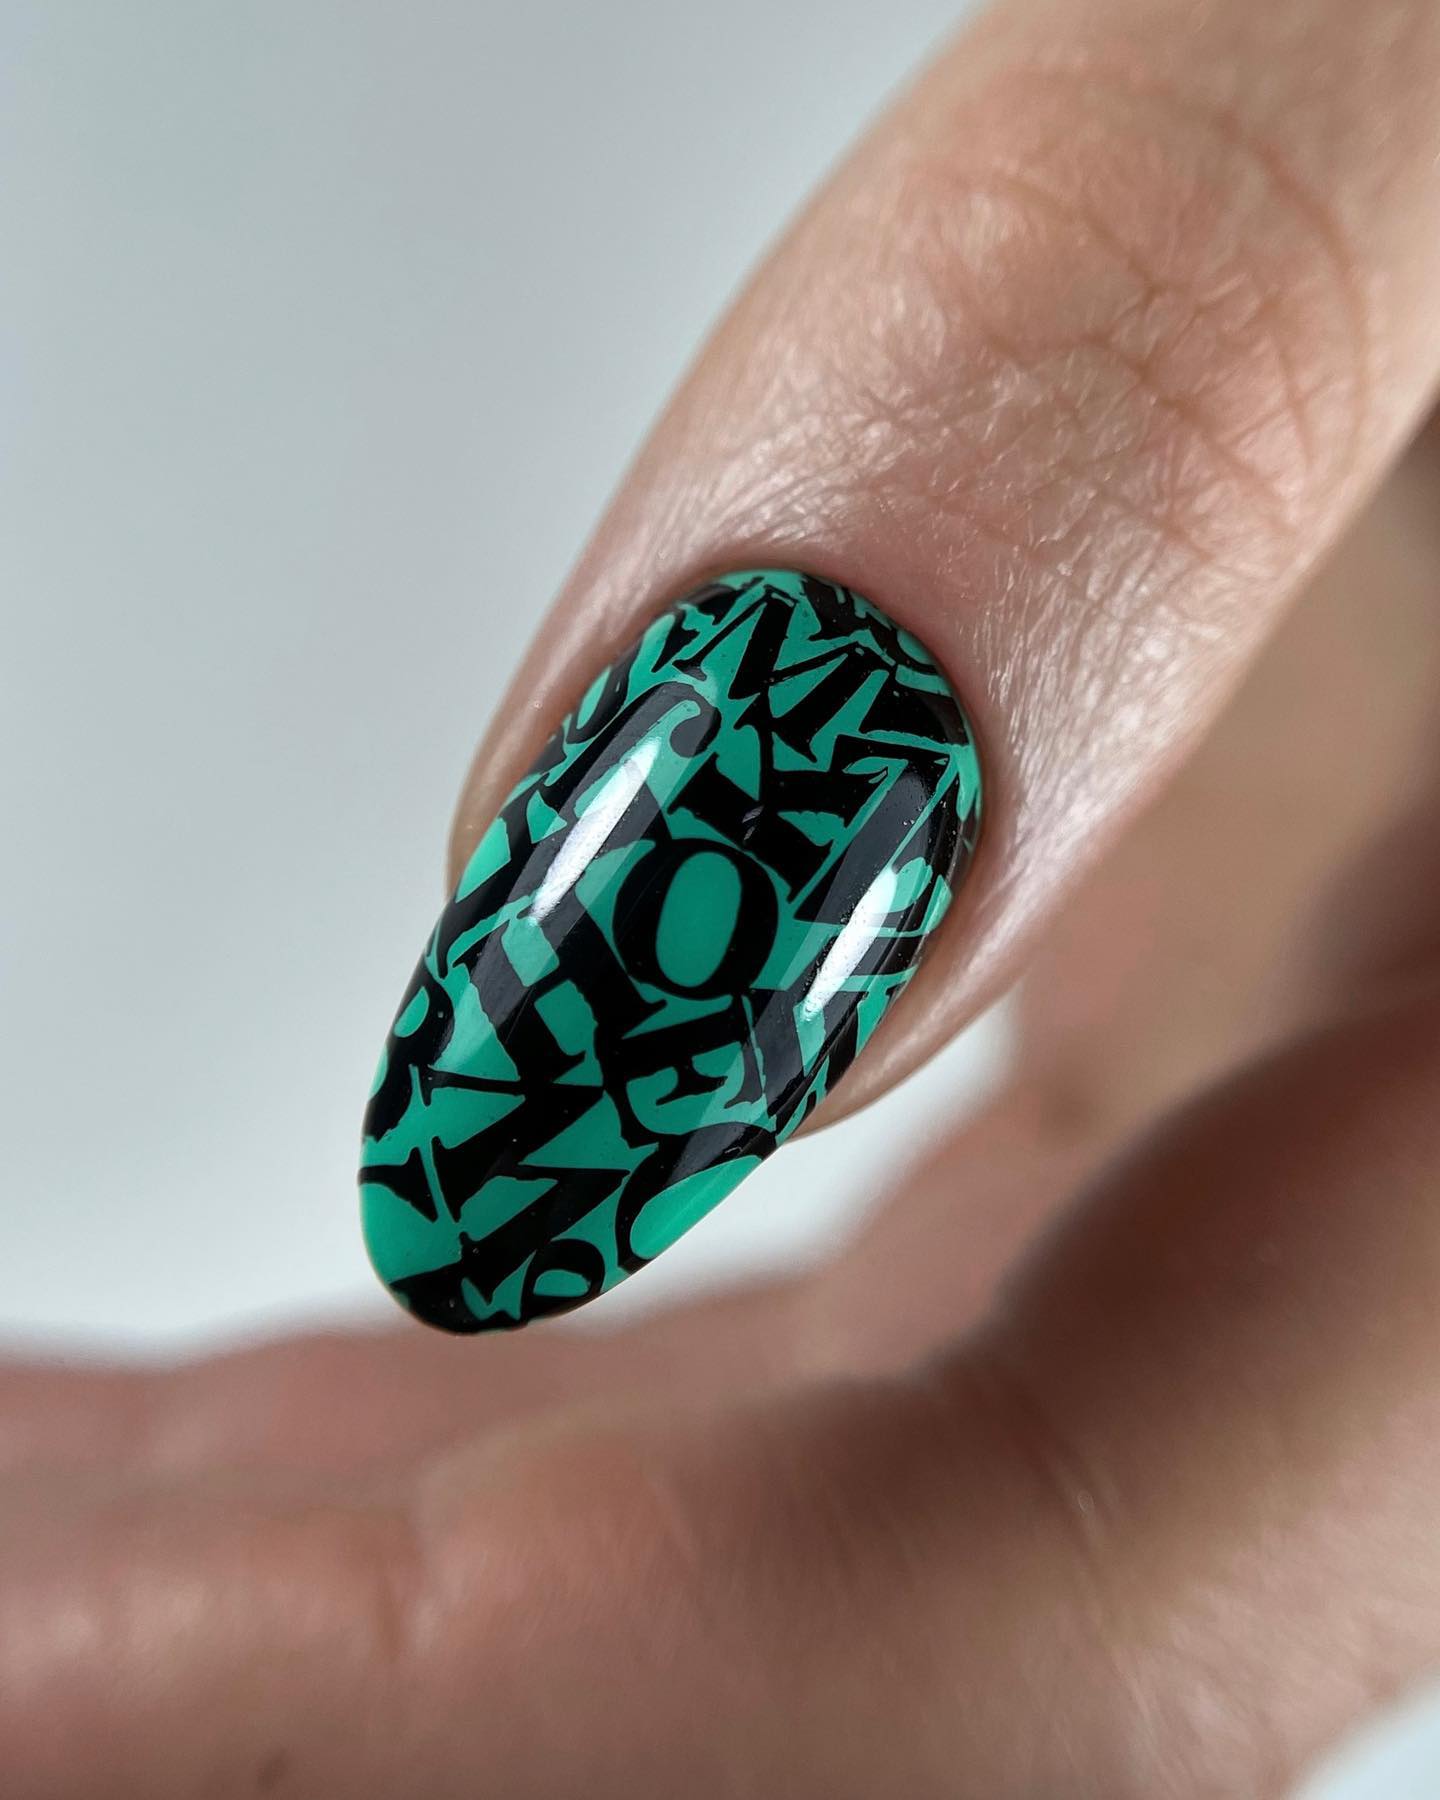 Swanky Stamping, Пластина 109